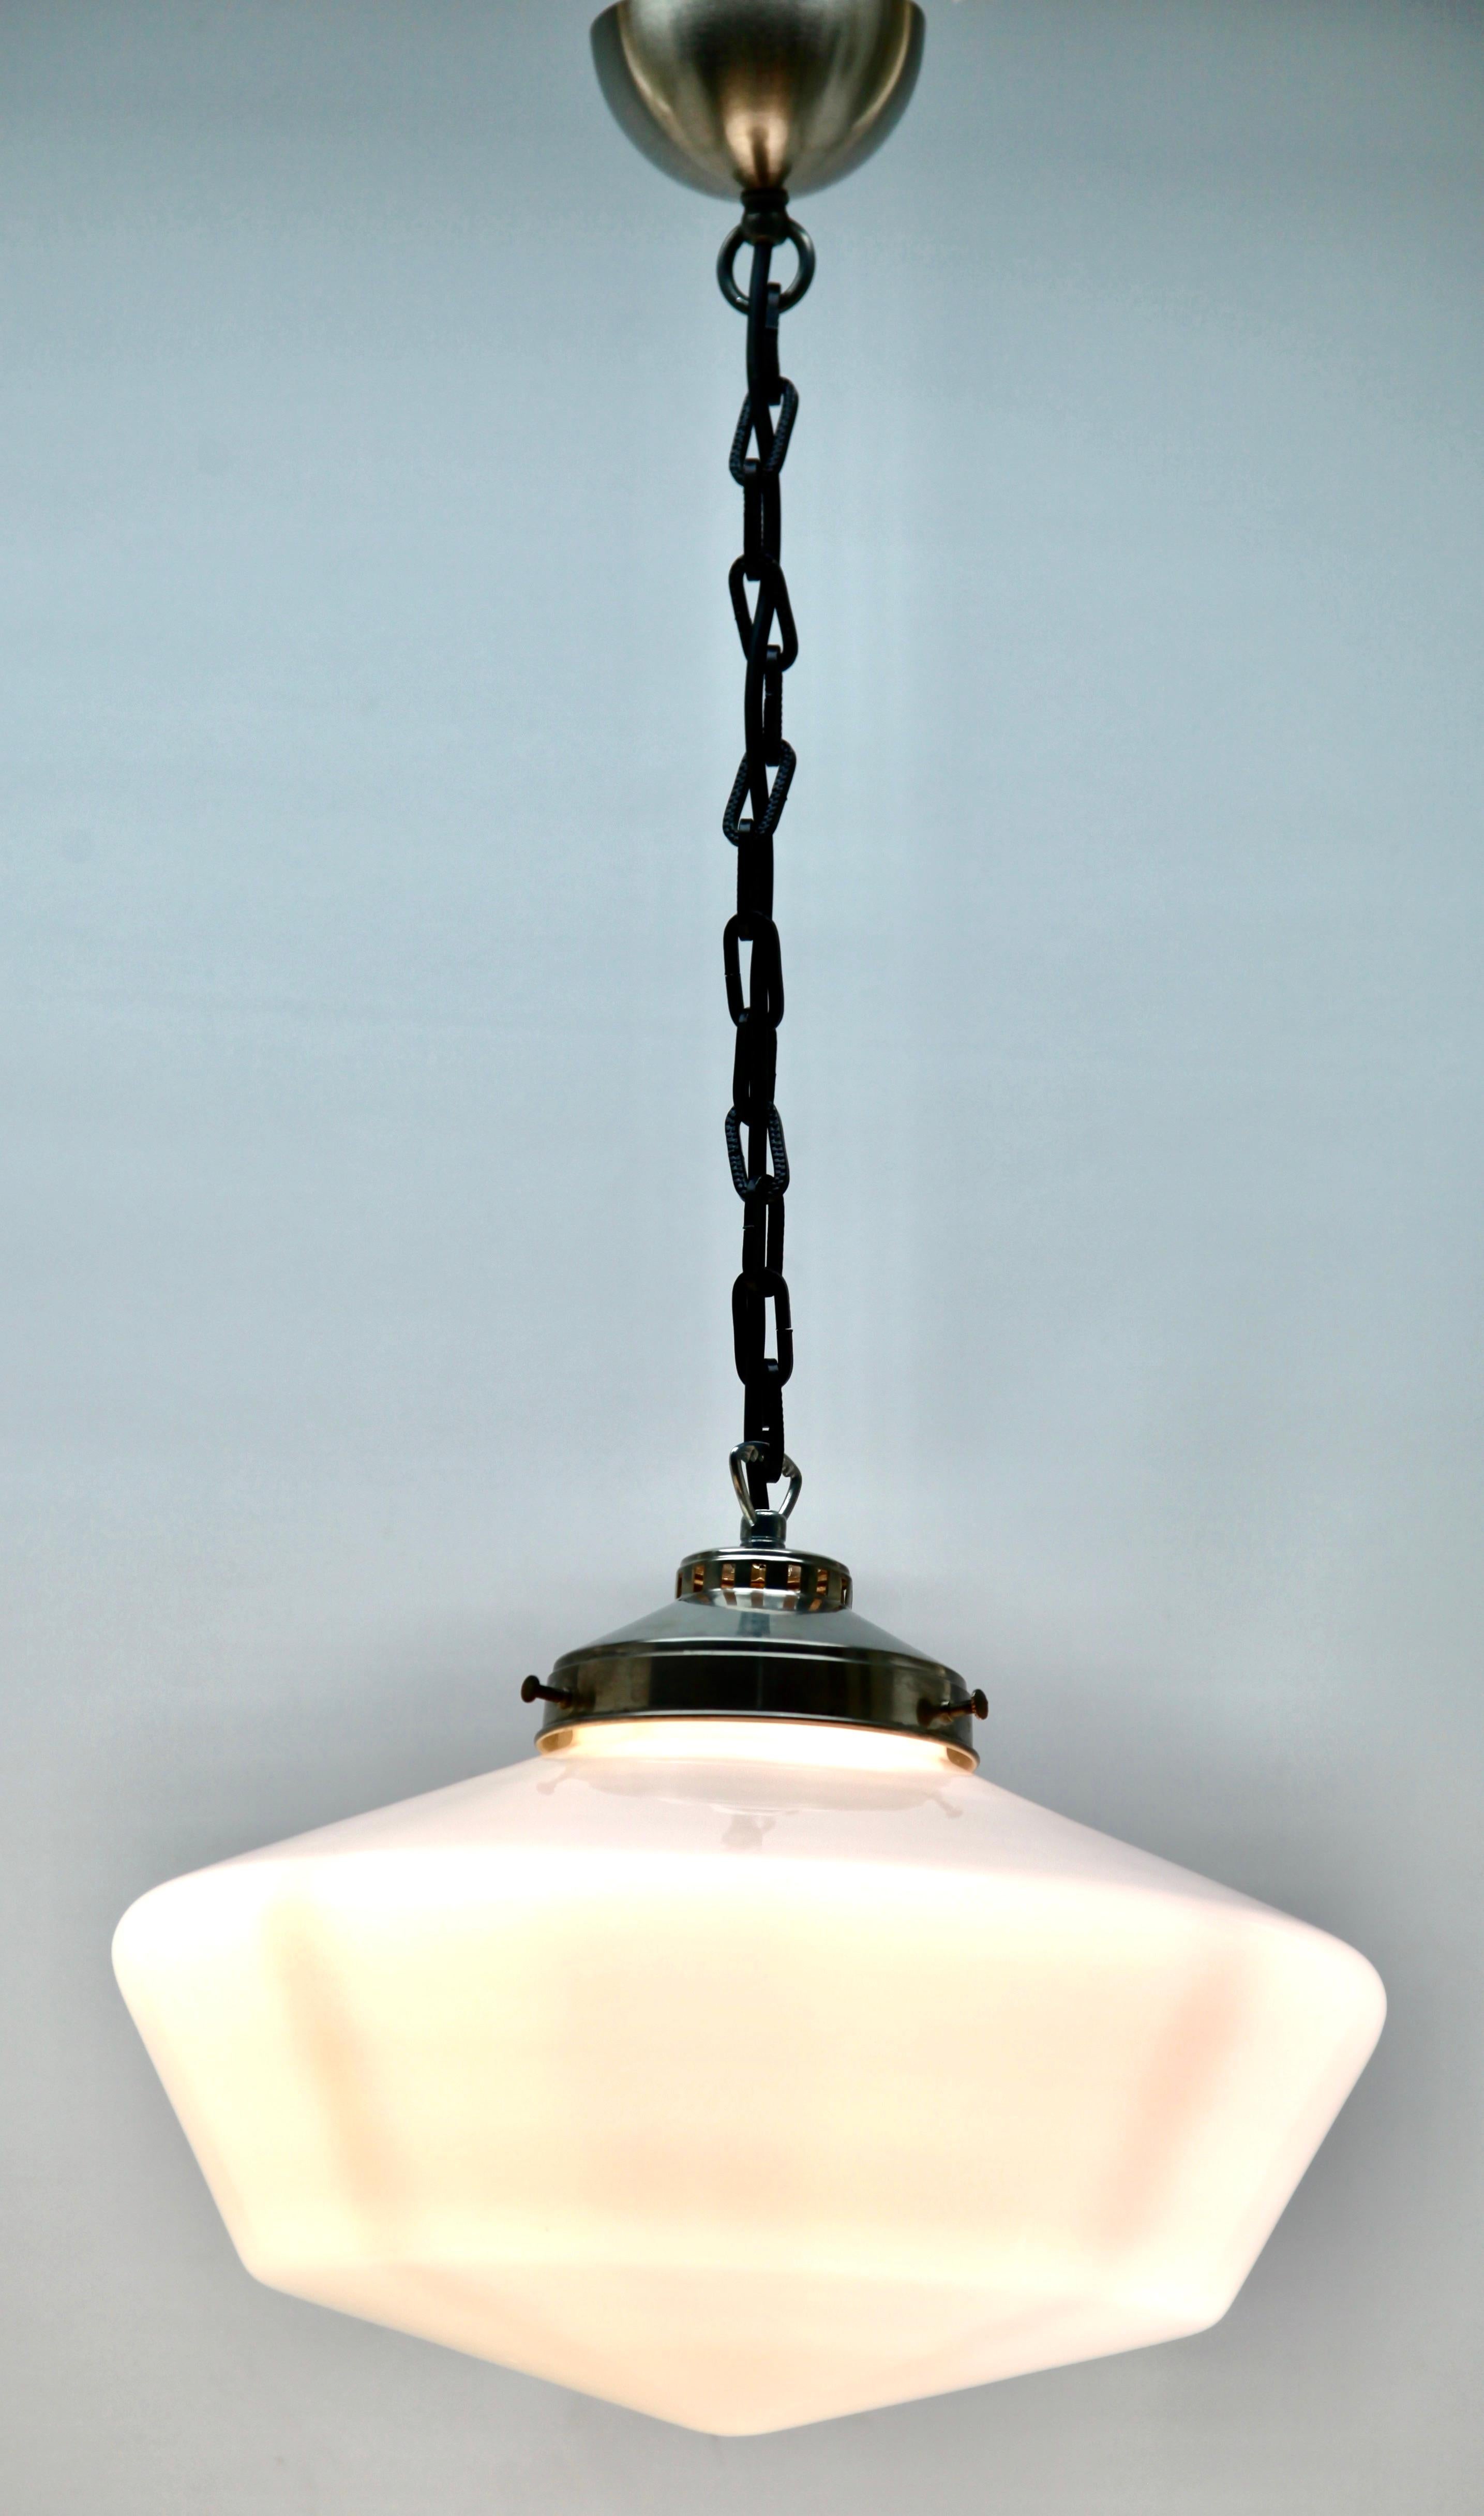 Hanging pendant light from the late 1960s on an adjustable chain, with an opaline shade. Its Classic modernist form and simplicity in design, make it an iconic example of midcentury home lighting.
Size shade: Height 23 cm- 9.05-inch, diameter 36 cm